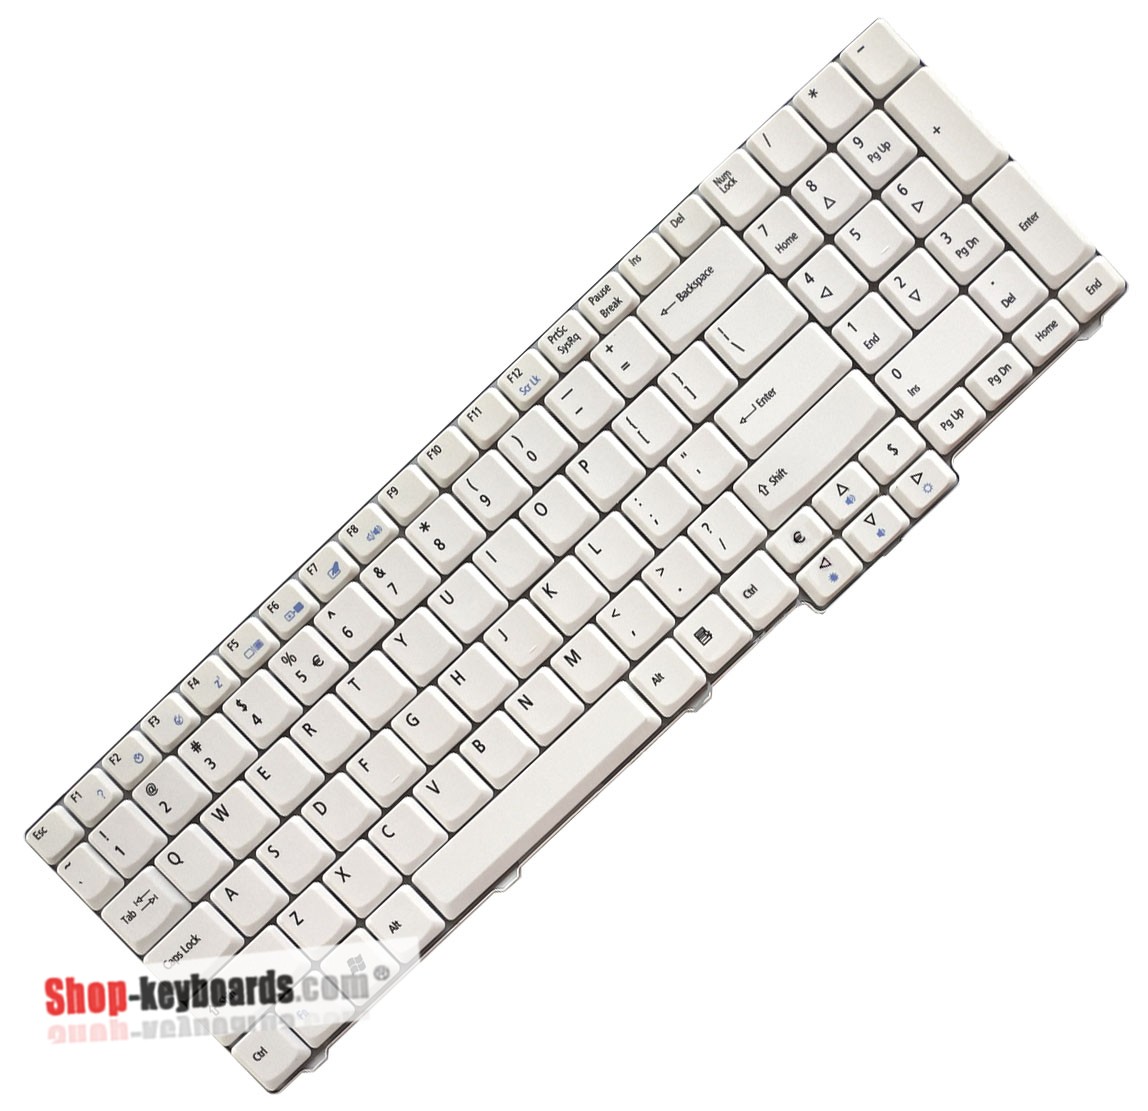 Acer Aspire 8730G-644G32MN Keyboard replacement